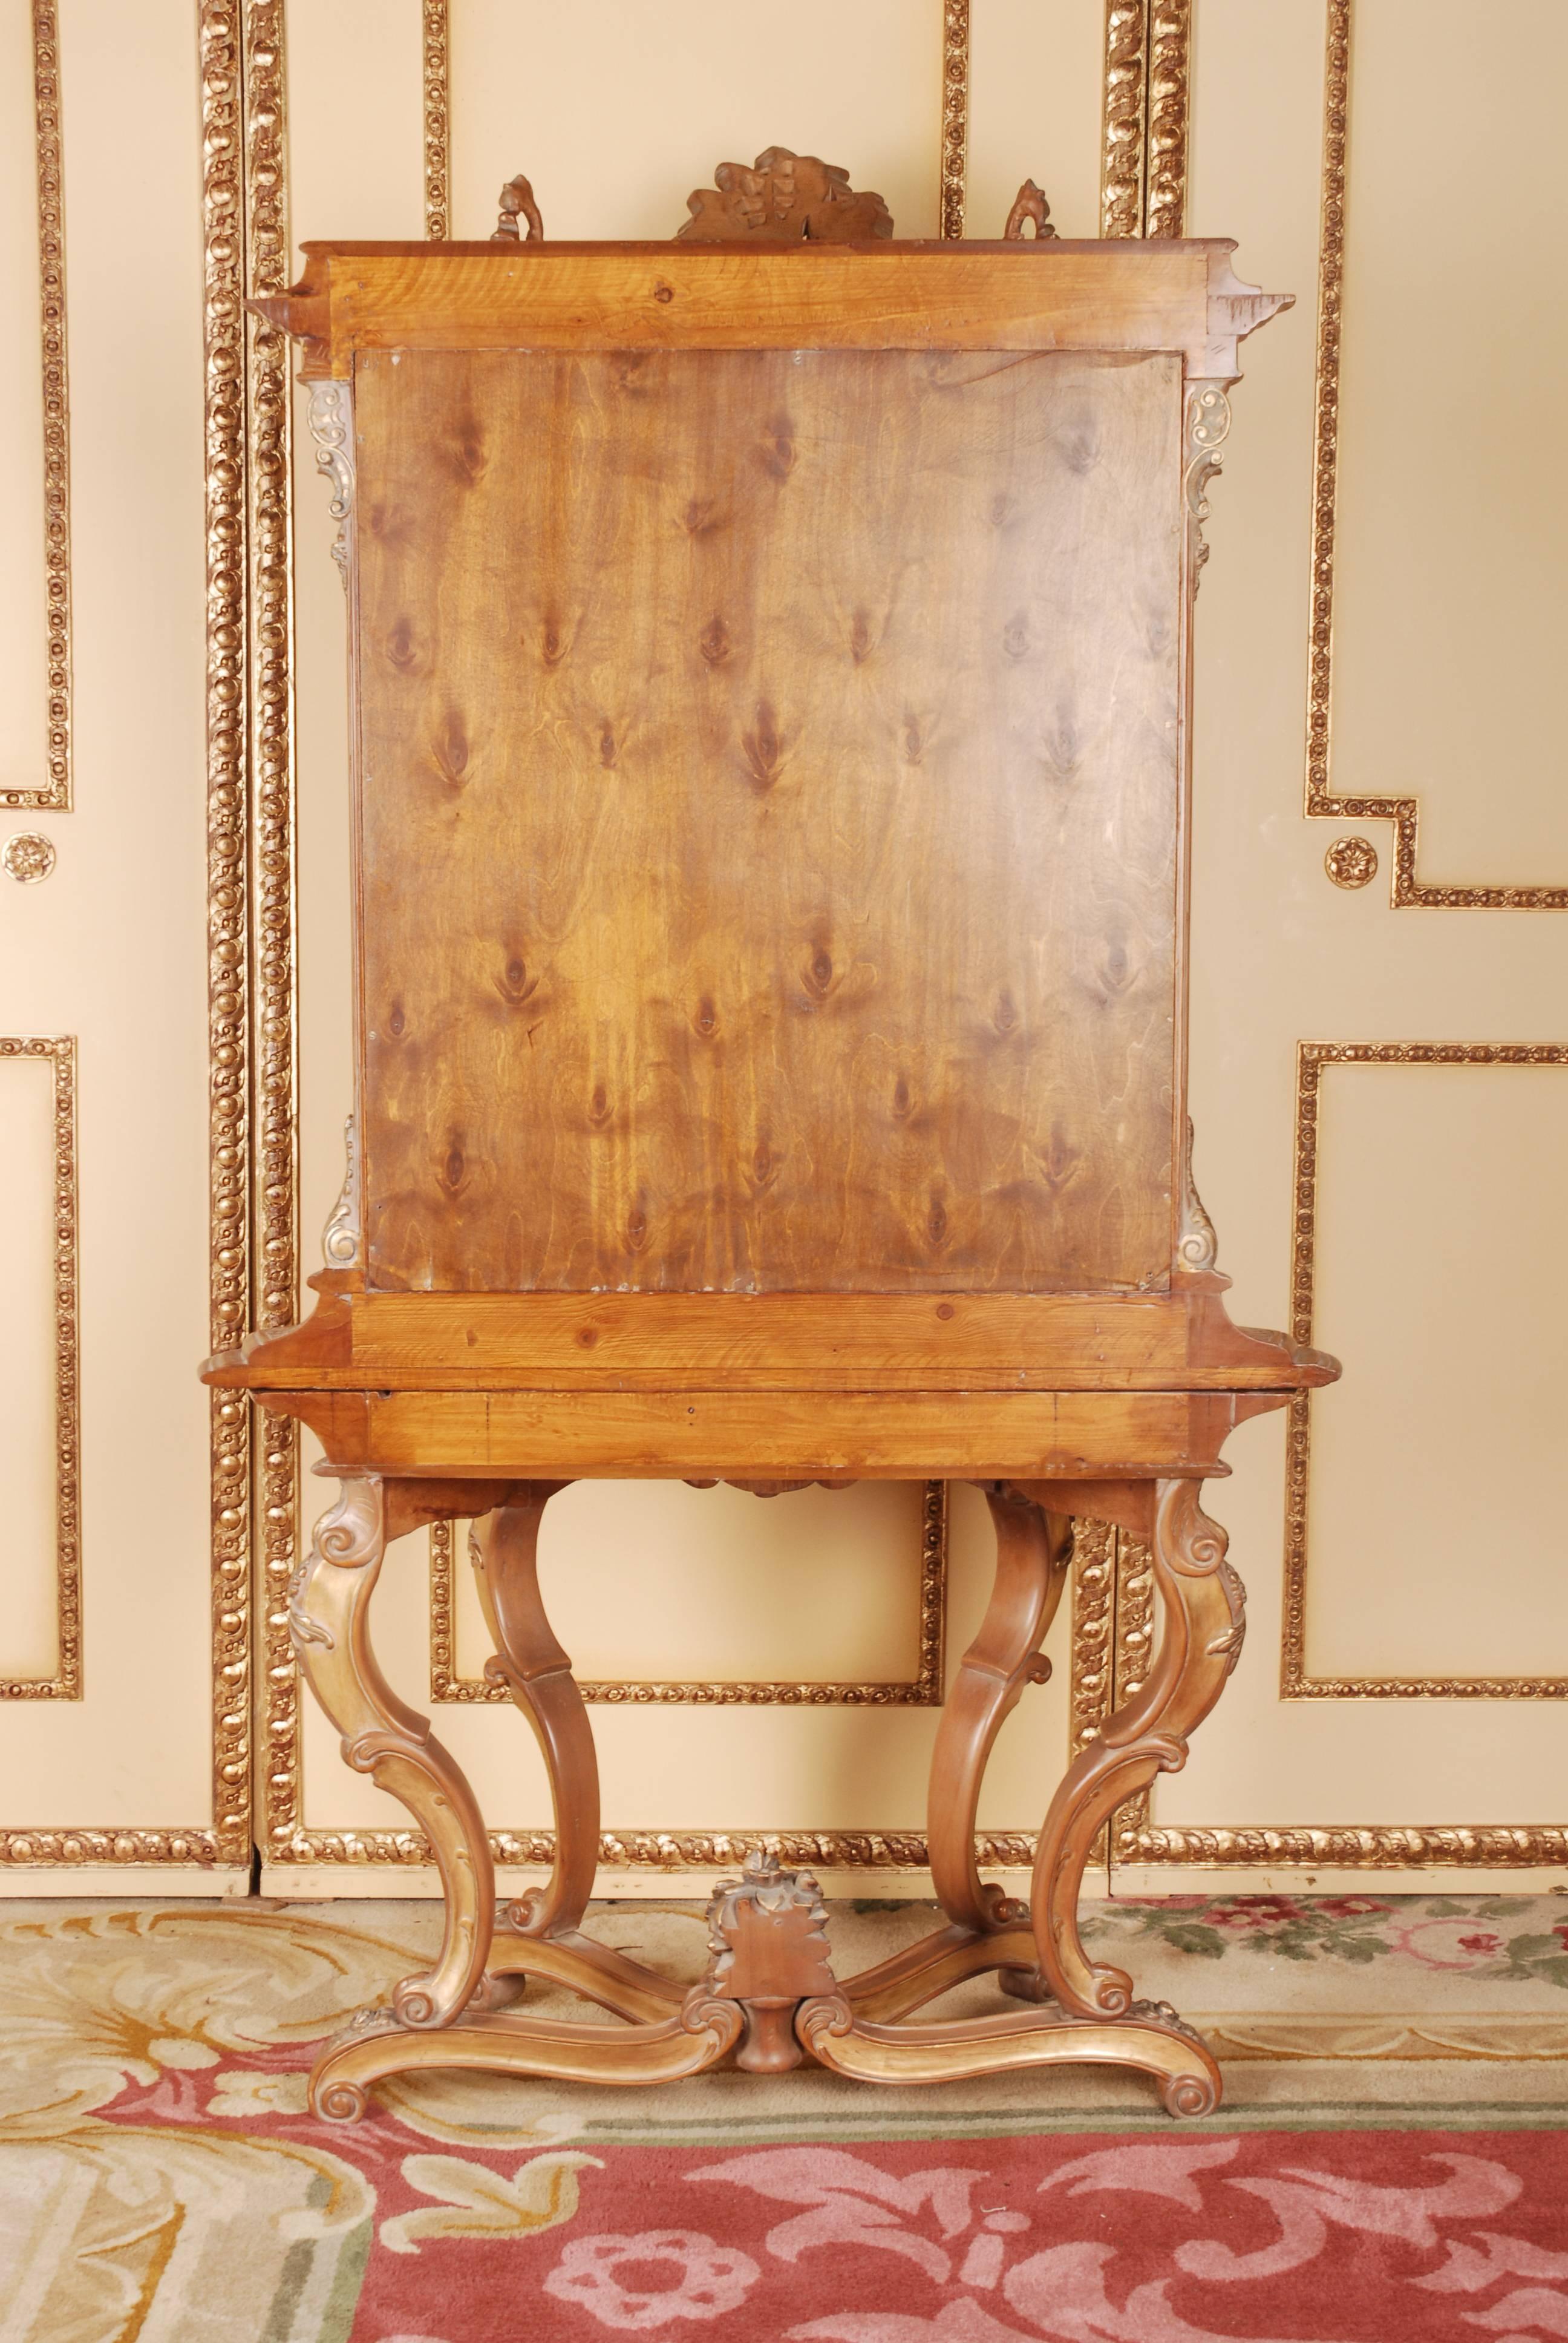 20th Century Splendid Display Cabinet in the Rococo Style 3